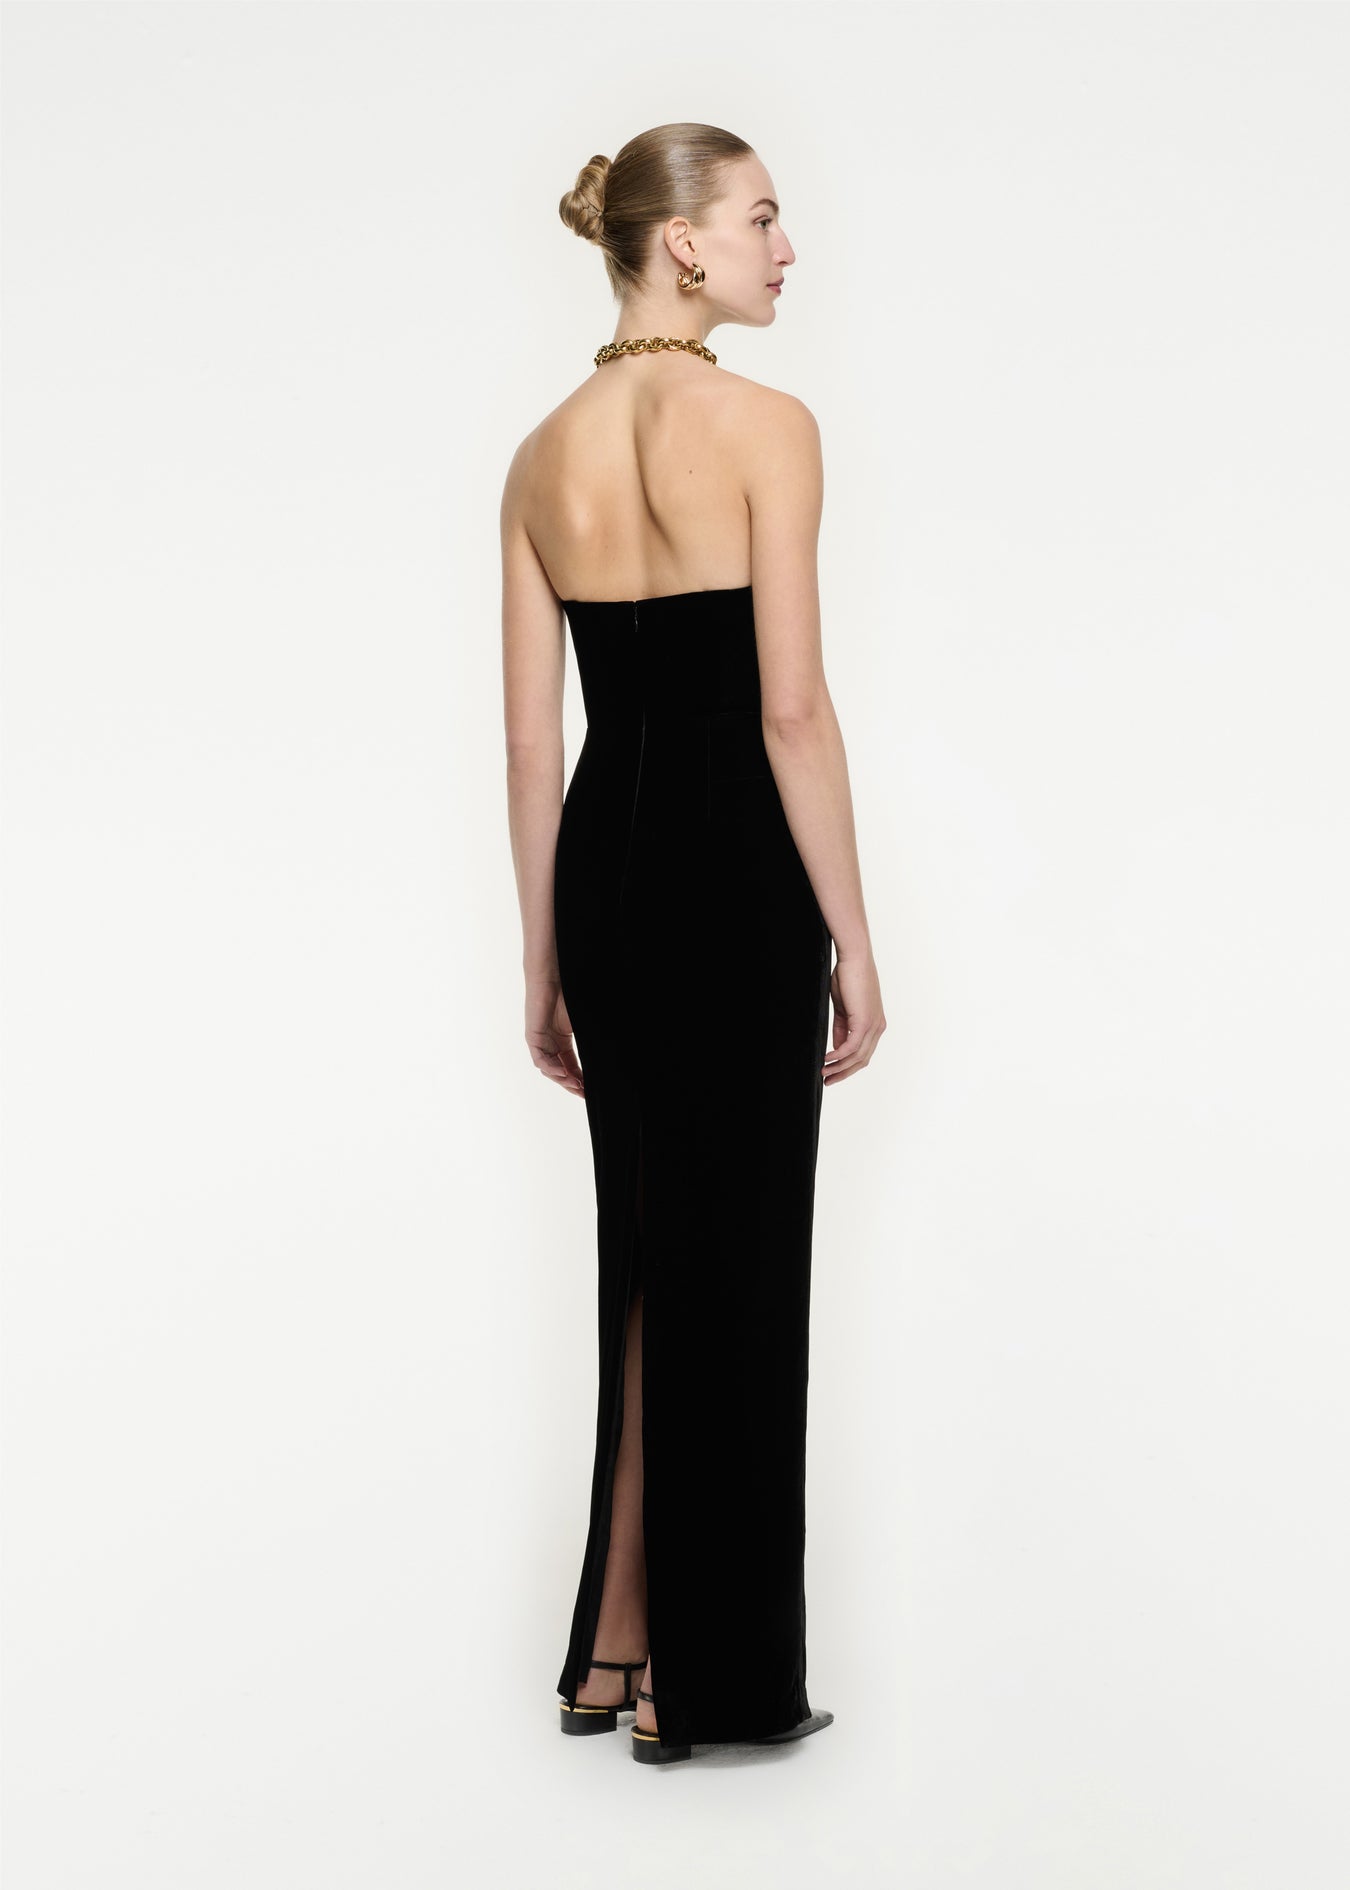 The back of a woman wearing the Strapless Velvet Gown in Black